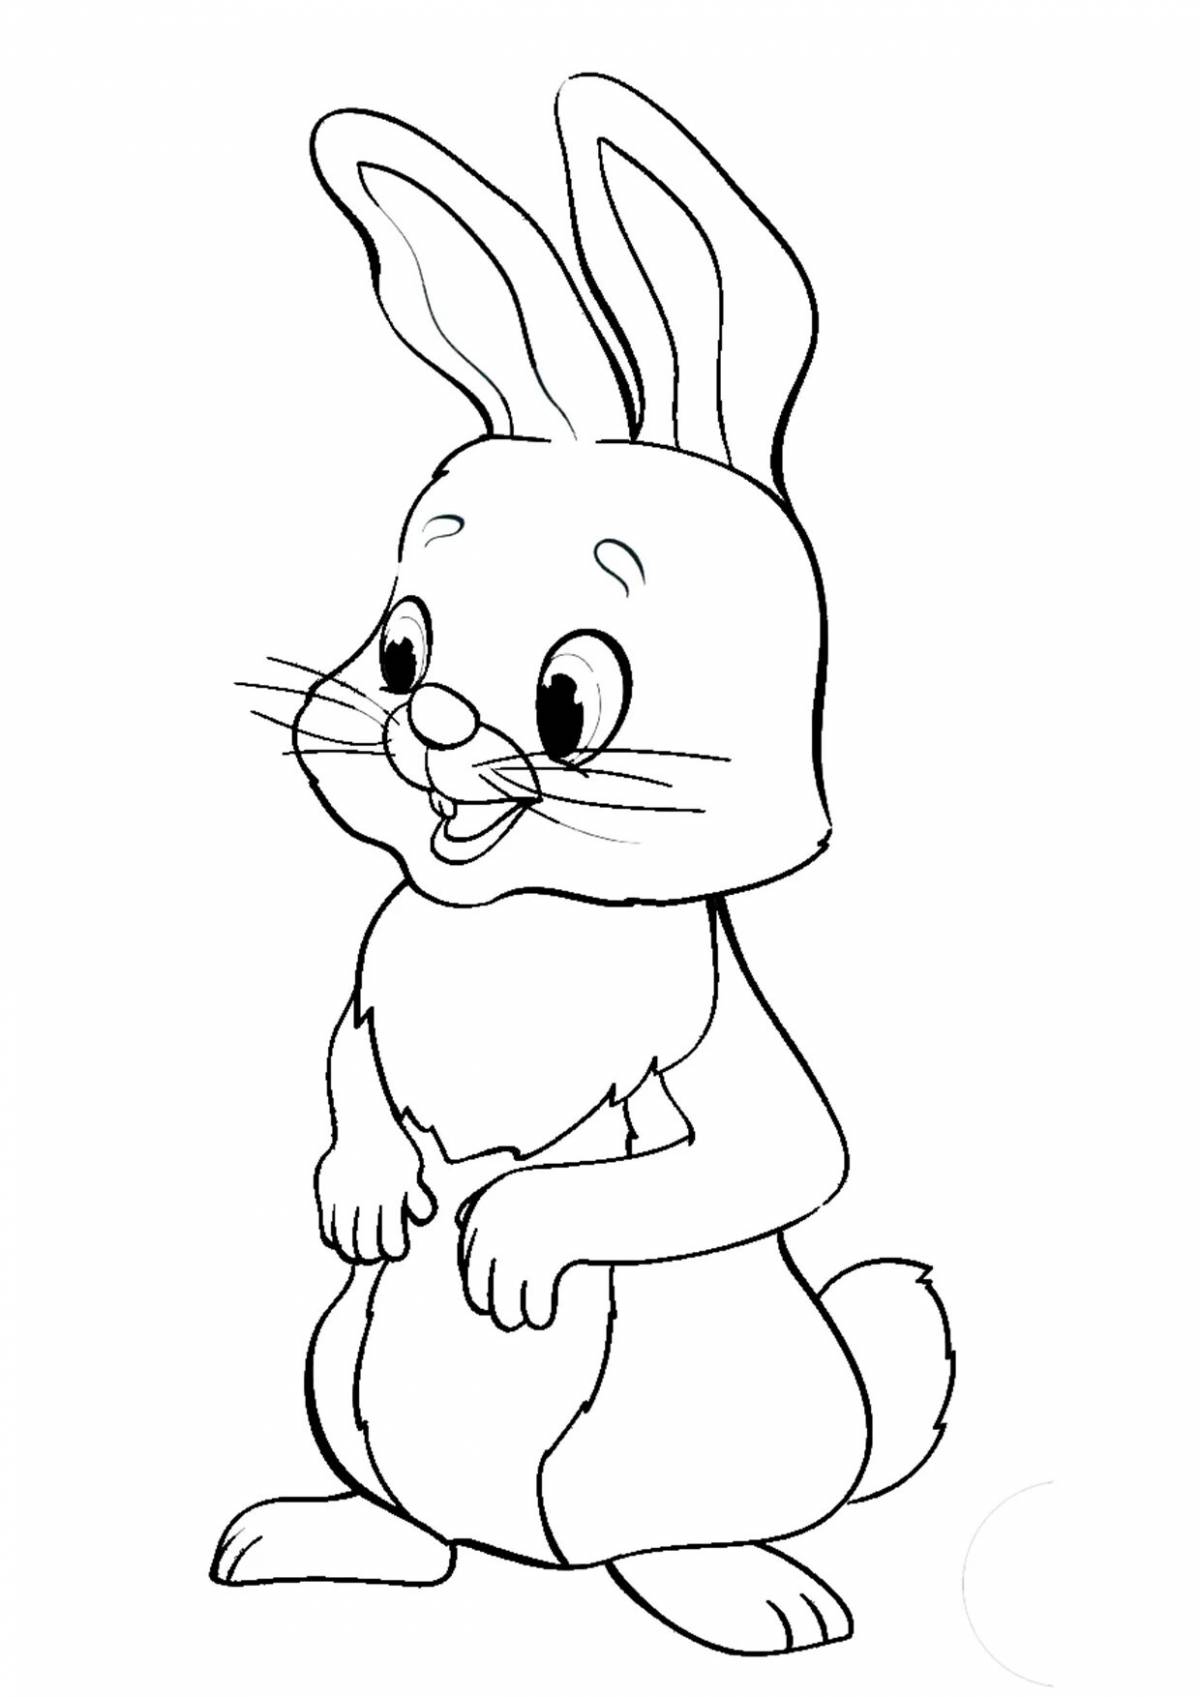 Zippy coloring page bunny for 2-3 year olds